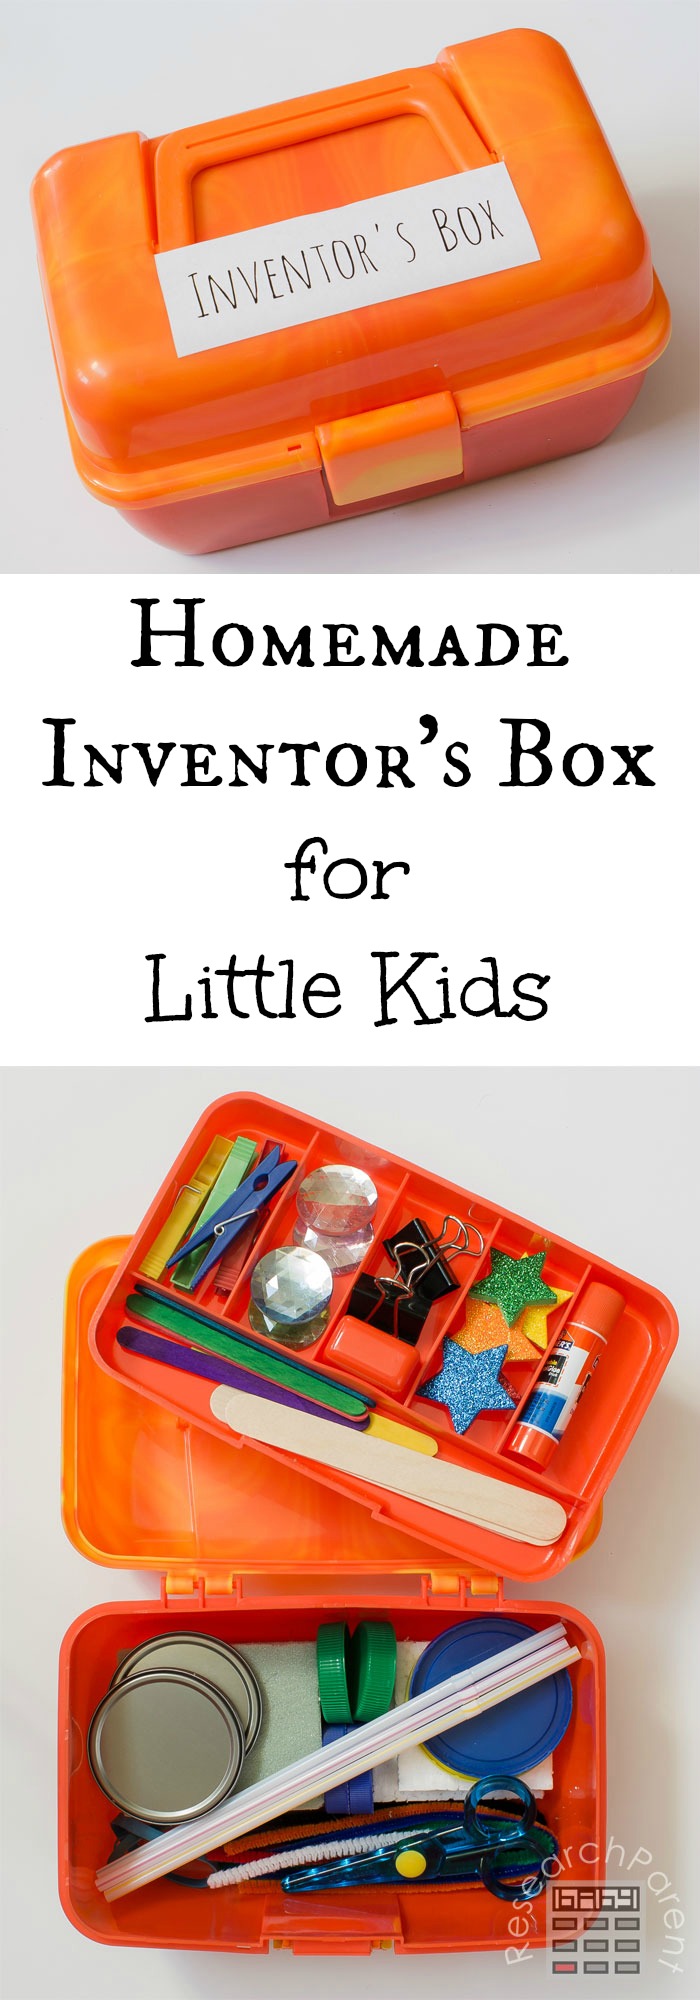 Inventor's Box for Little Kids